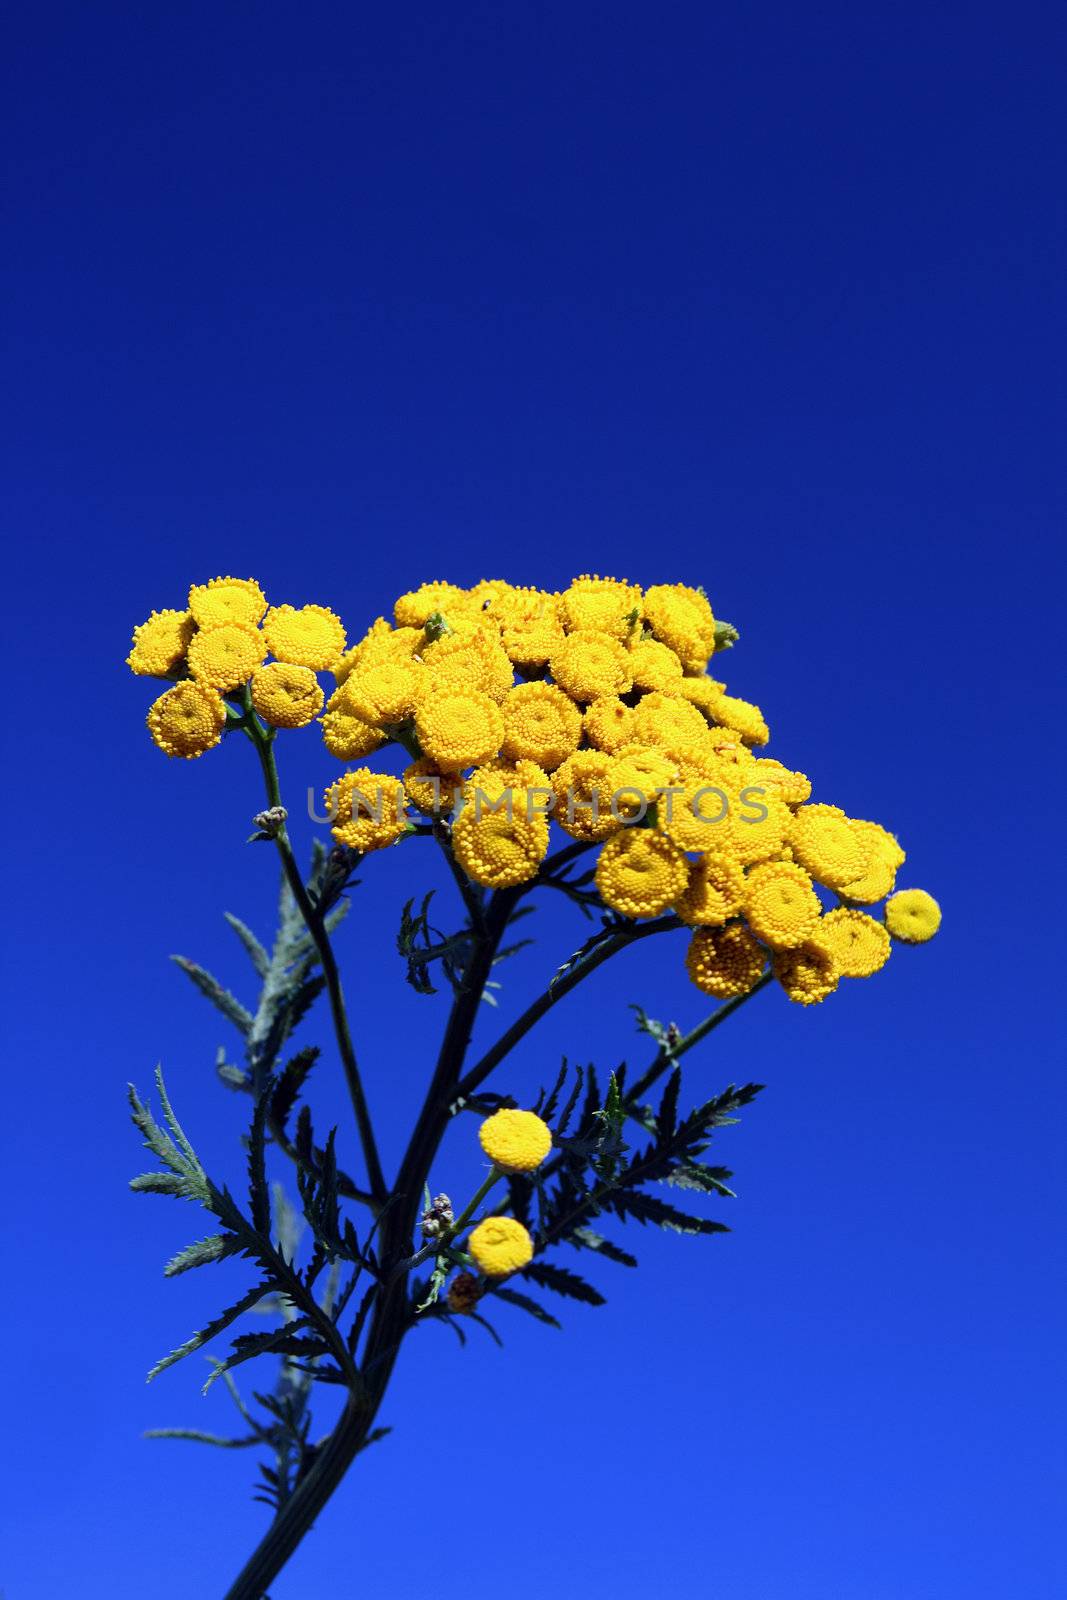 tansy under blue sky  by Mikko